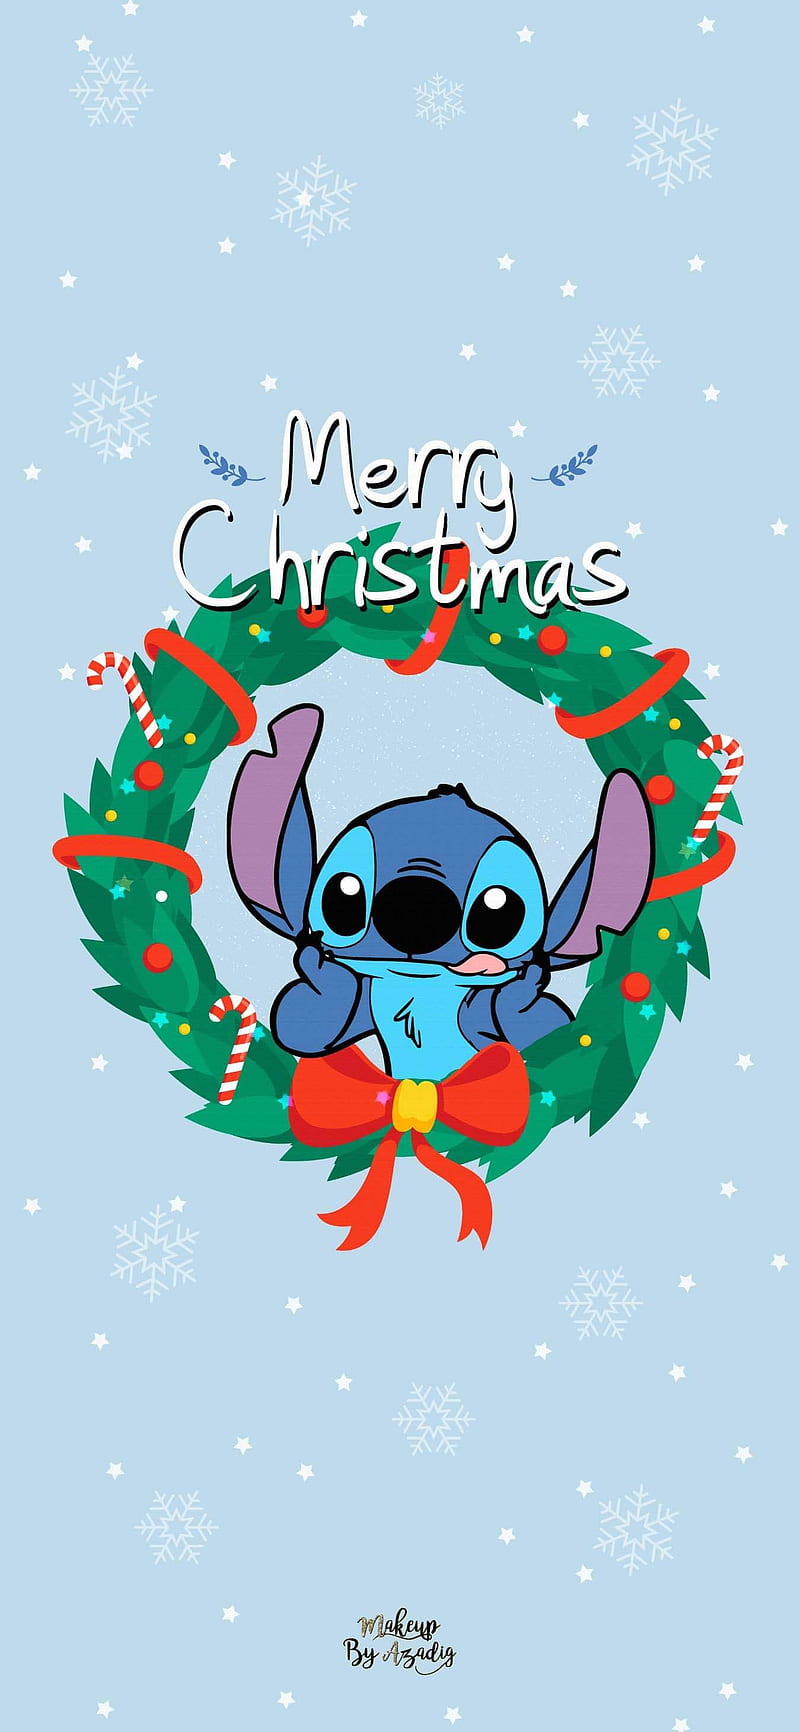 Download Disney Christmas iPhone Stitch Candy Cane Wallpaper  Wallpapers com